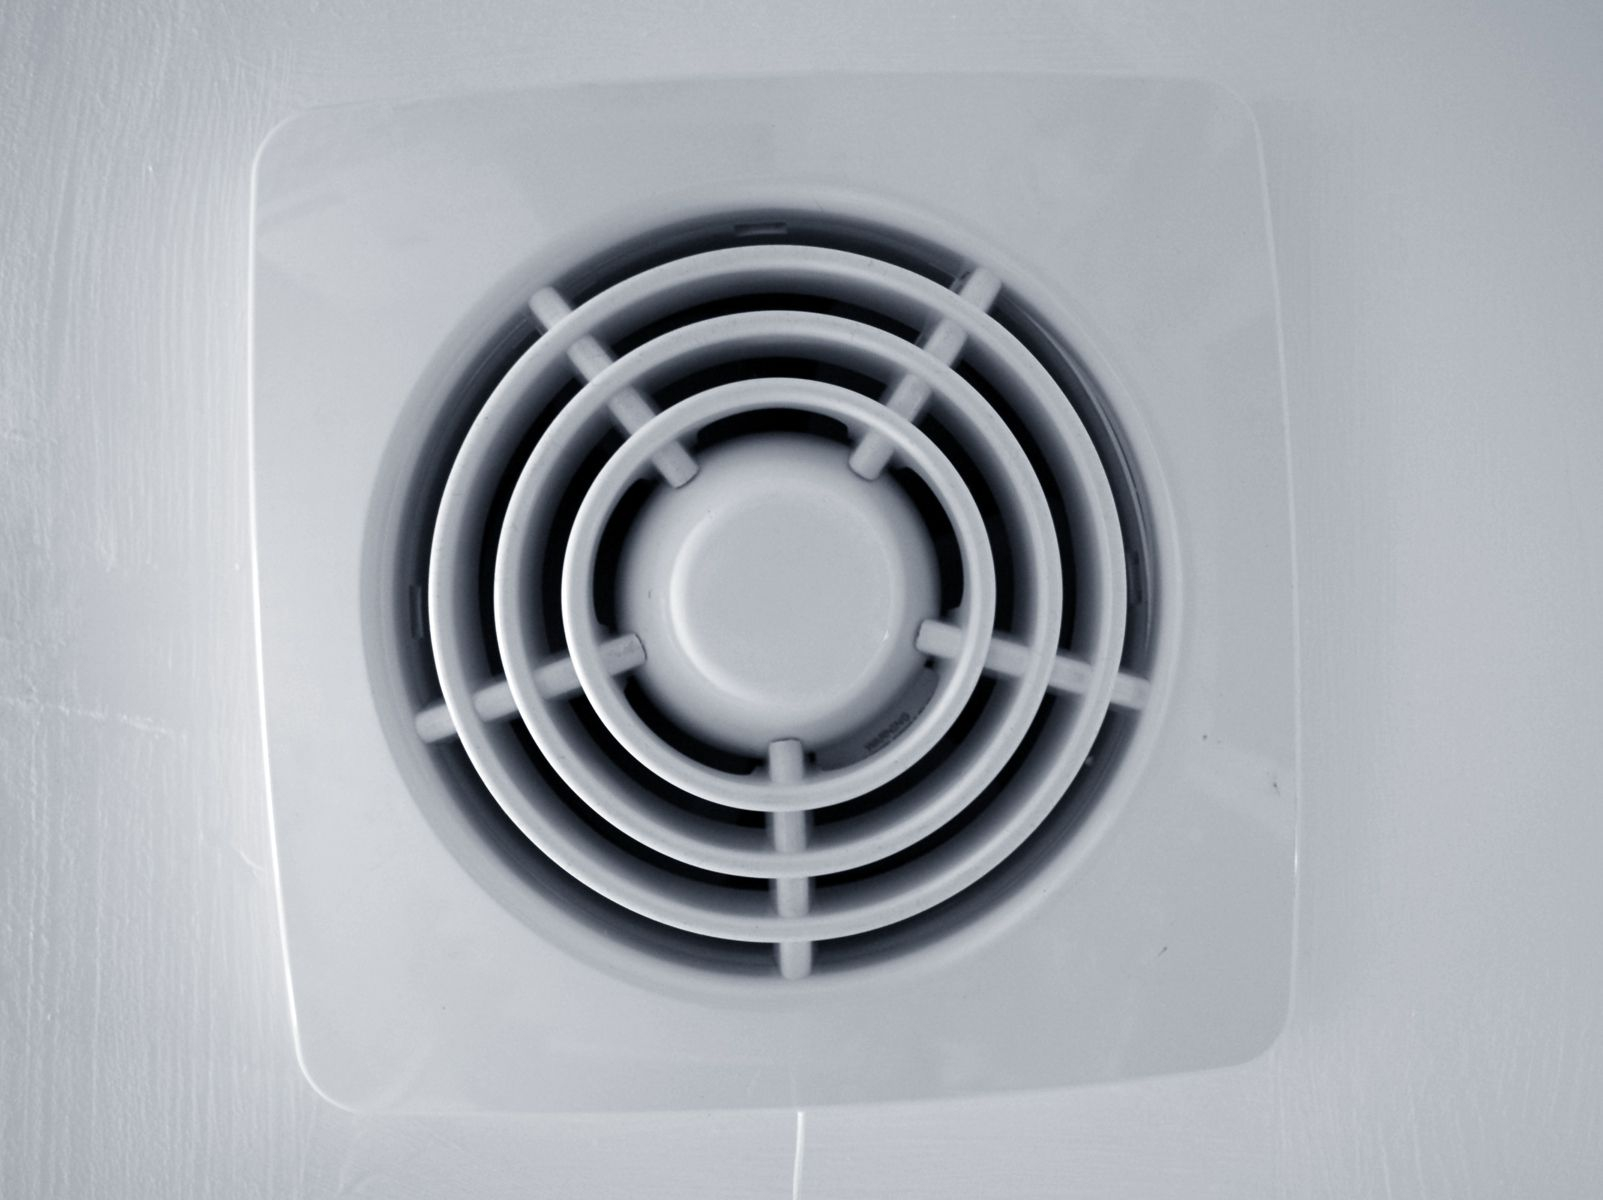 Bathroom Venting Code Exhaust Fans And Windows intended for sizing 1603 X 1200